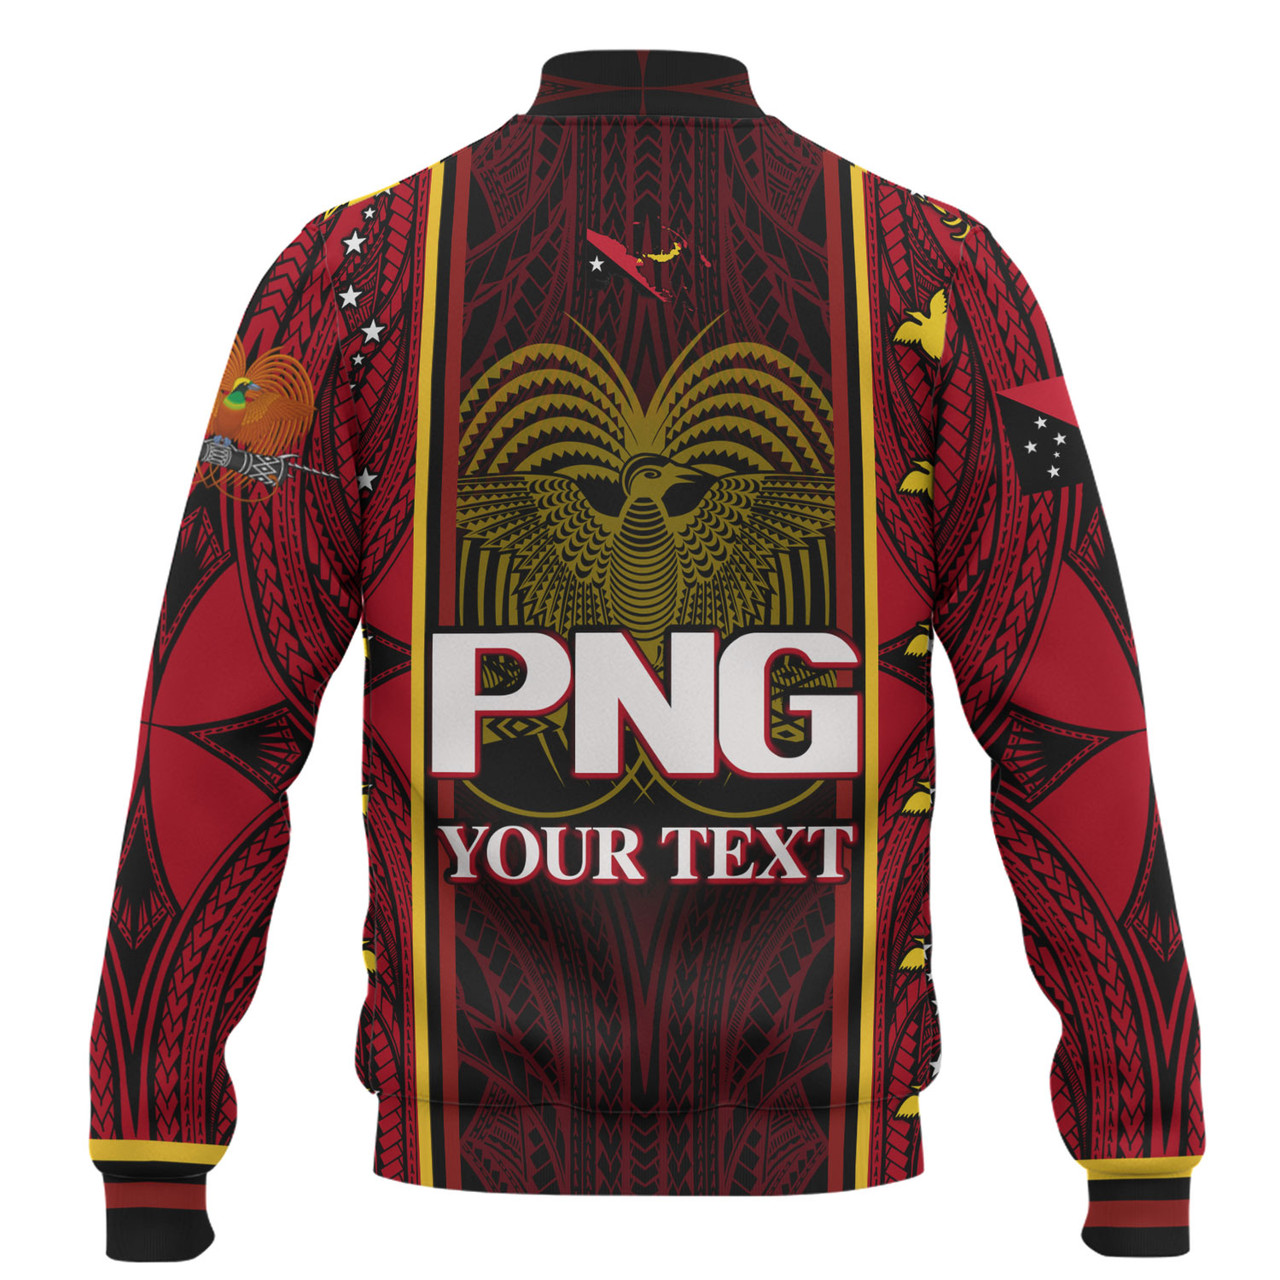 Papua New Guinea Custom Personalised Baseball Jacket  Seal And Map Tribal Traditional Patterns